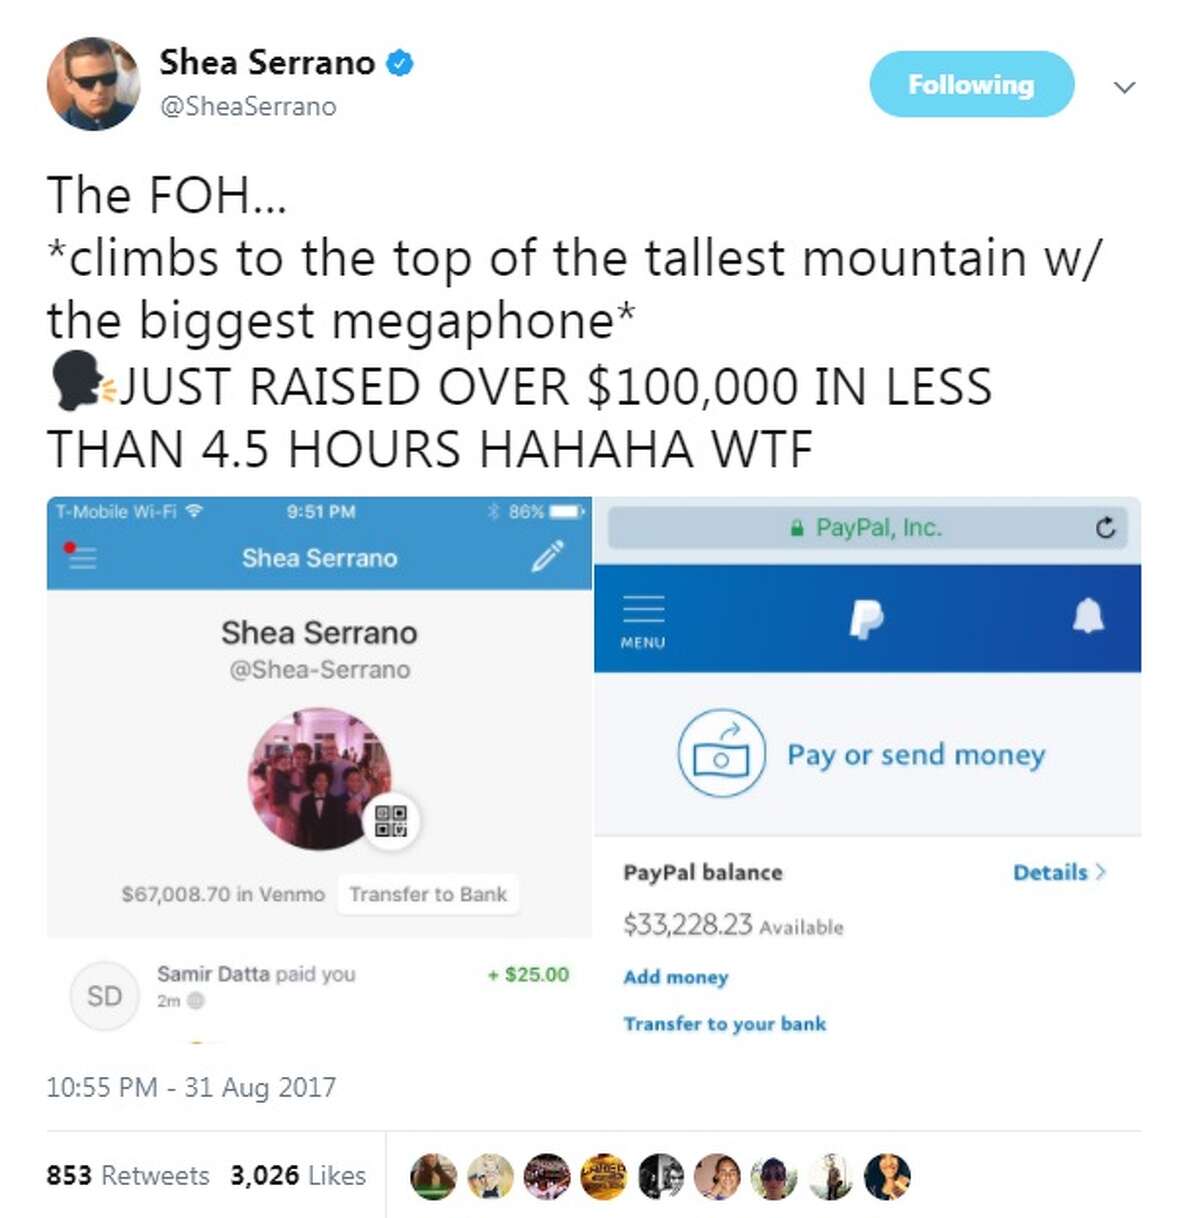 Shea Serrano's tweets during and after Hurricane Harvey, which helped people be rescued and raised money for victims. 